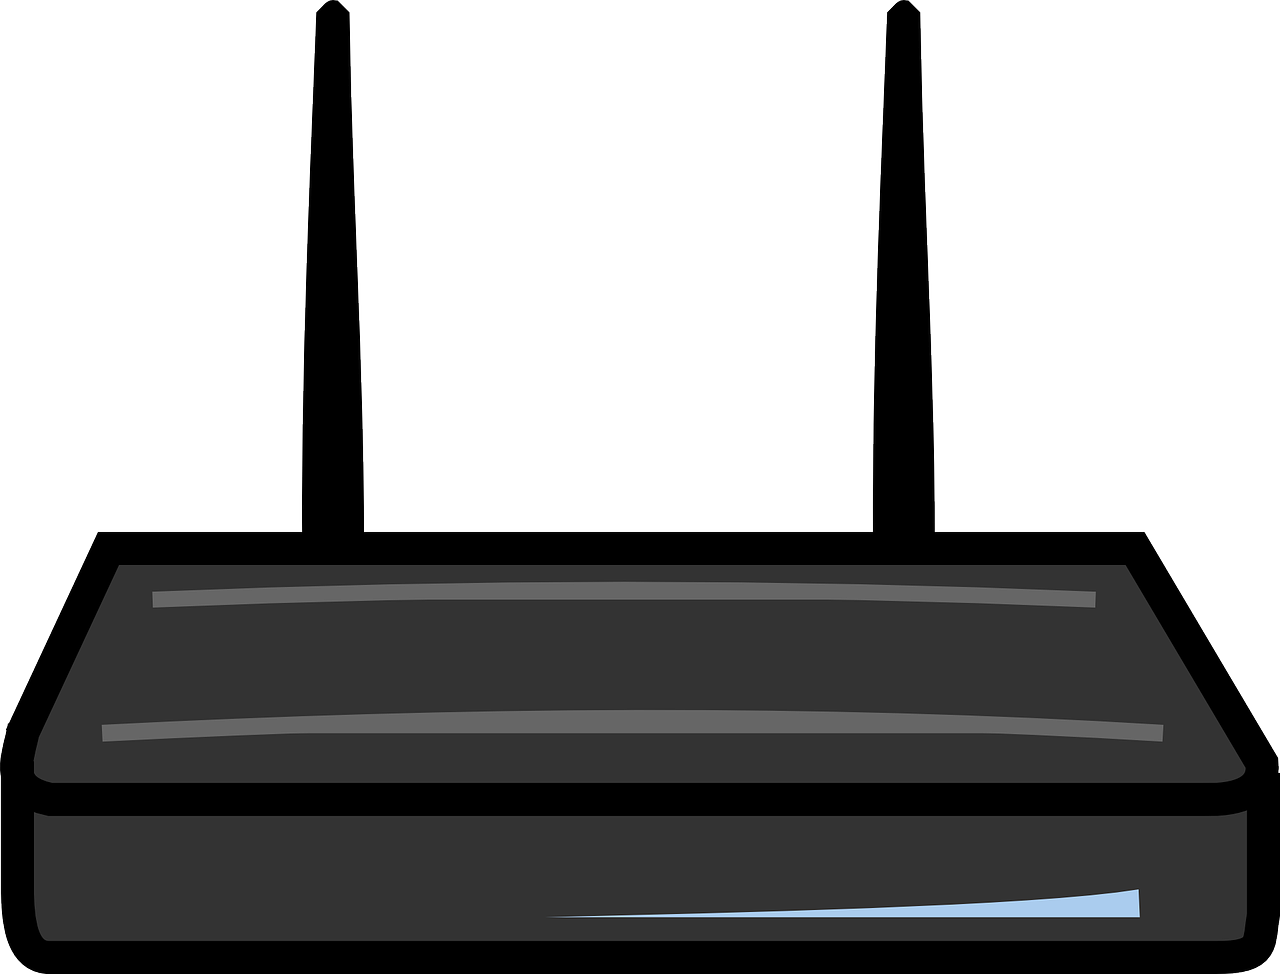 a wireless router on a white background, by Andrei Kolkoutine, black and blue scheme, drawn in microsoft paint, black roof, low profile